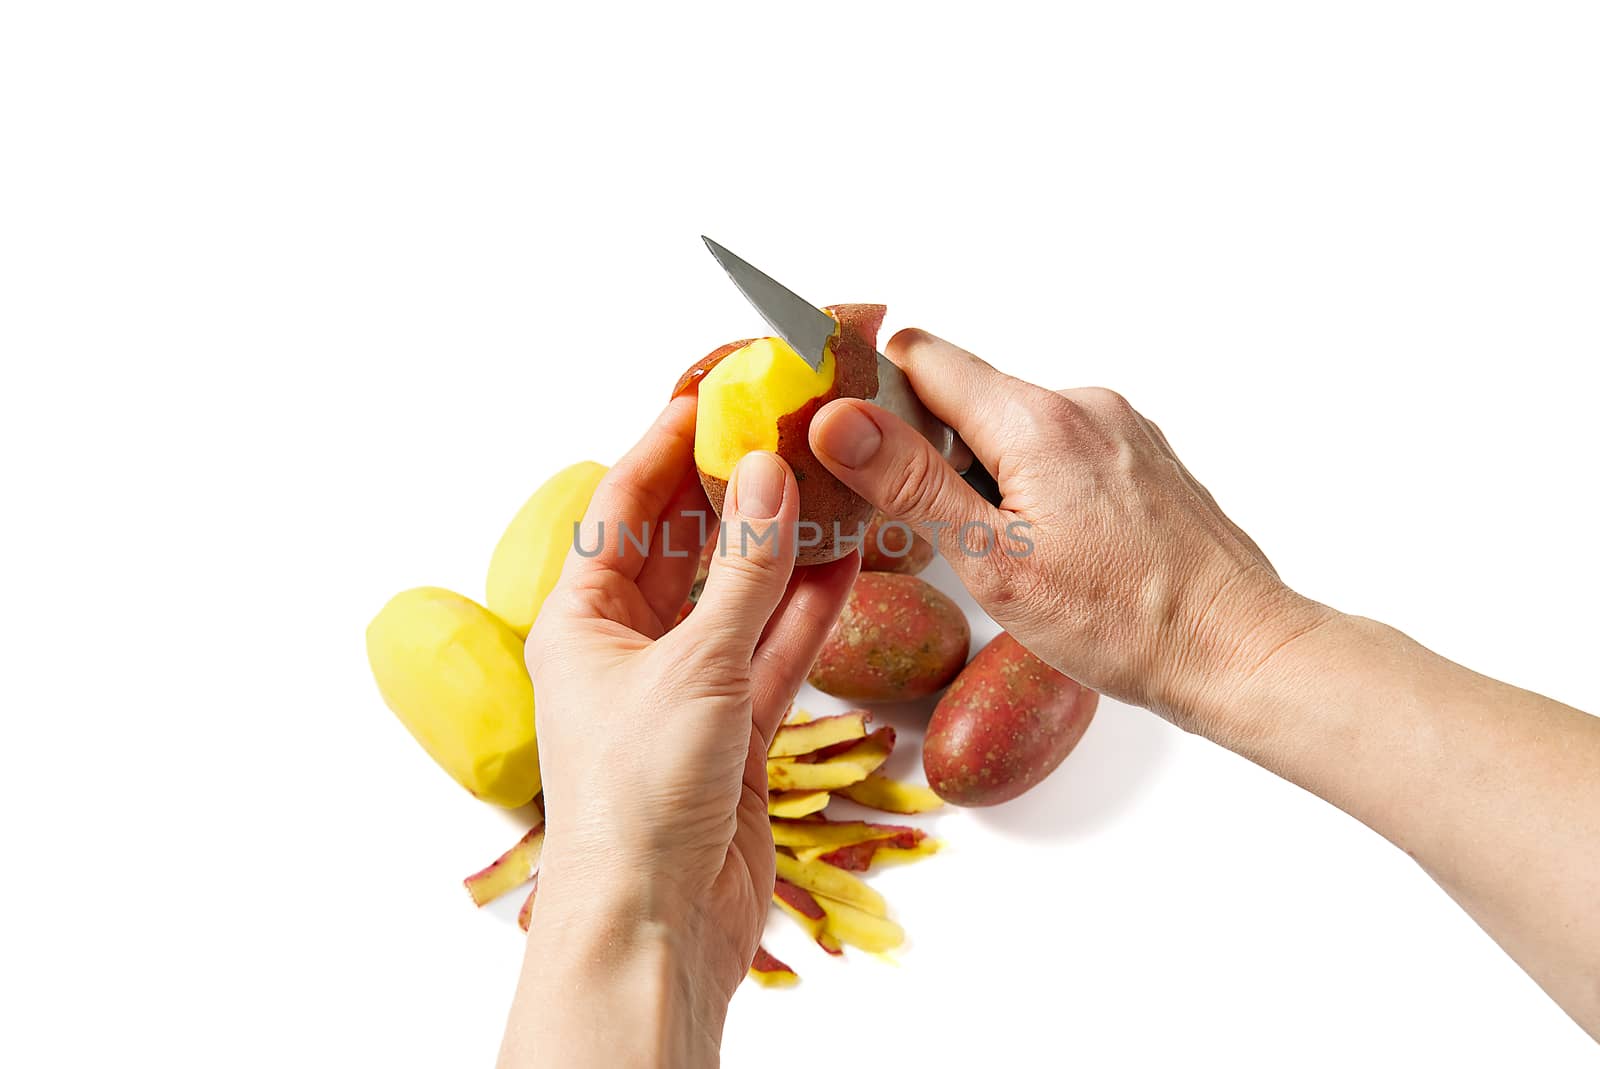 a pile of unpeeled potatoes and black potatoes peeling, white background, object isolated. potato and peeler. female hands peel potatoes with a knife by PhotoTime